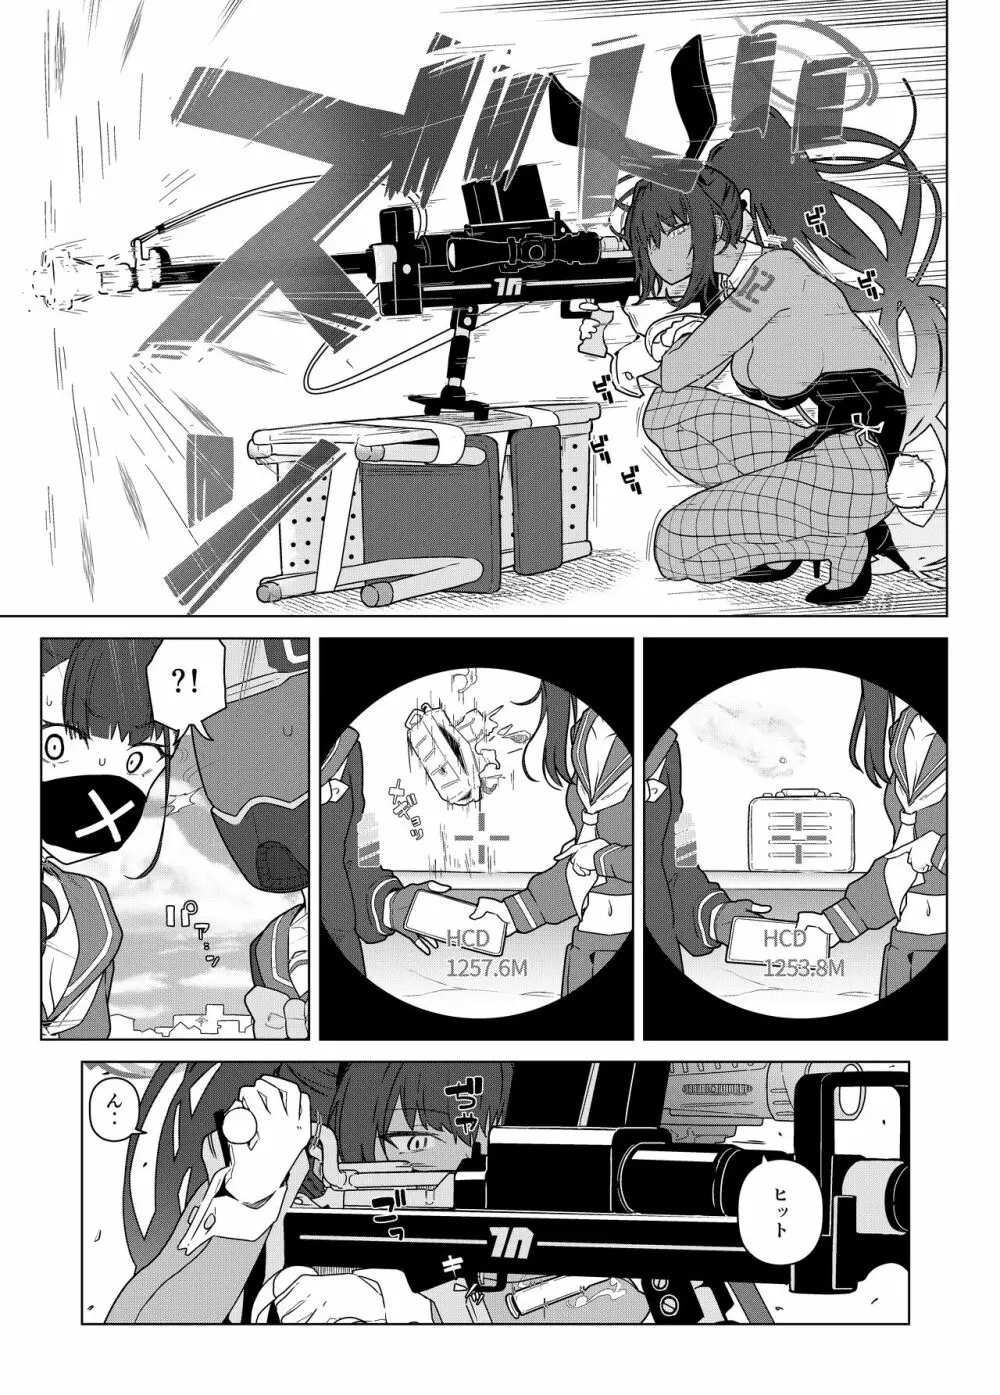 GIRLFriend's 19 Page.3